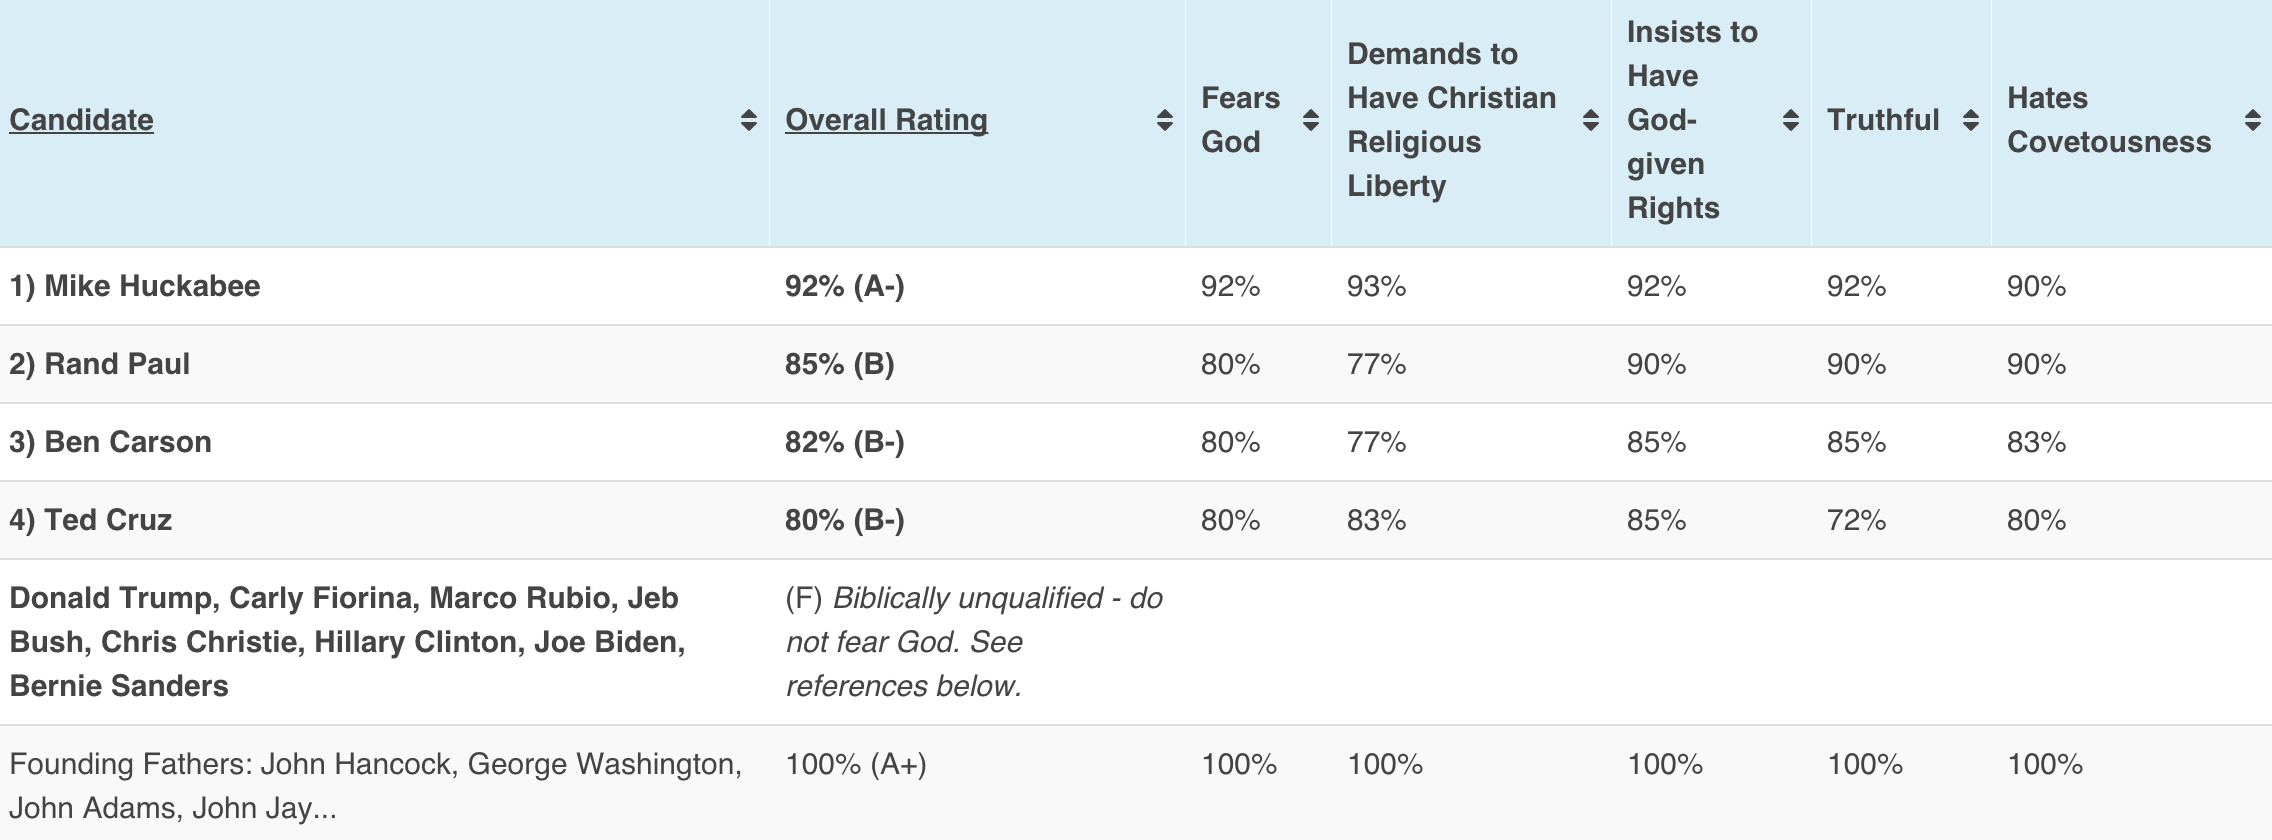 In Pastor’s Voting Guide, Even Mike Huckabee Isn’t Christian Enough to Get a Perfect Score